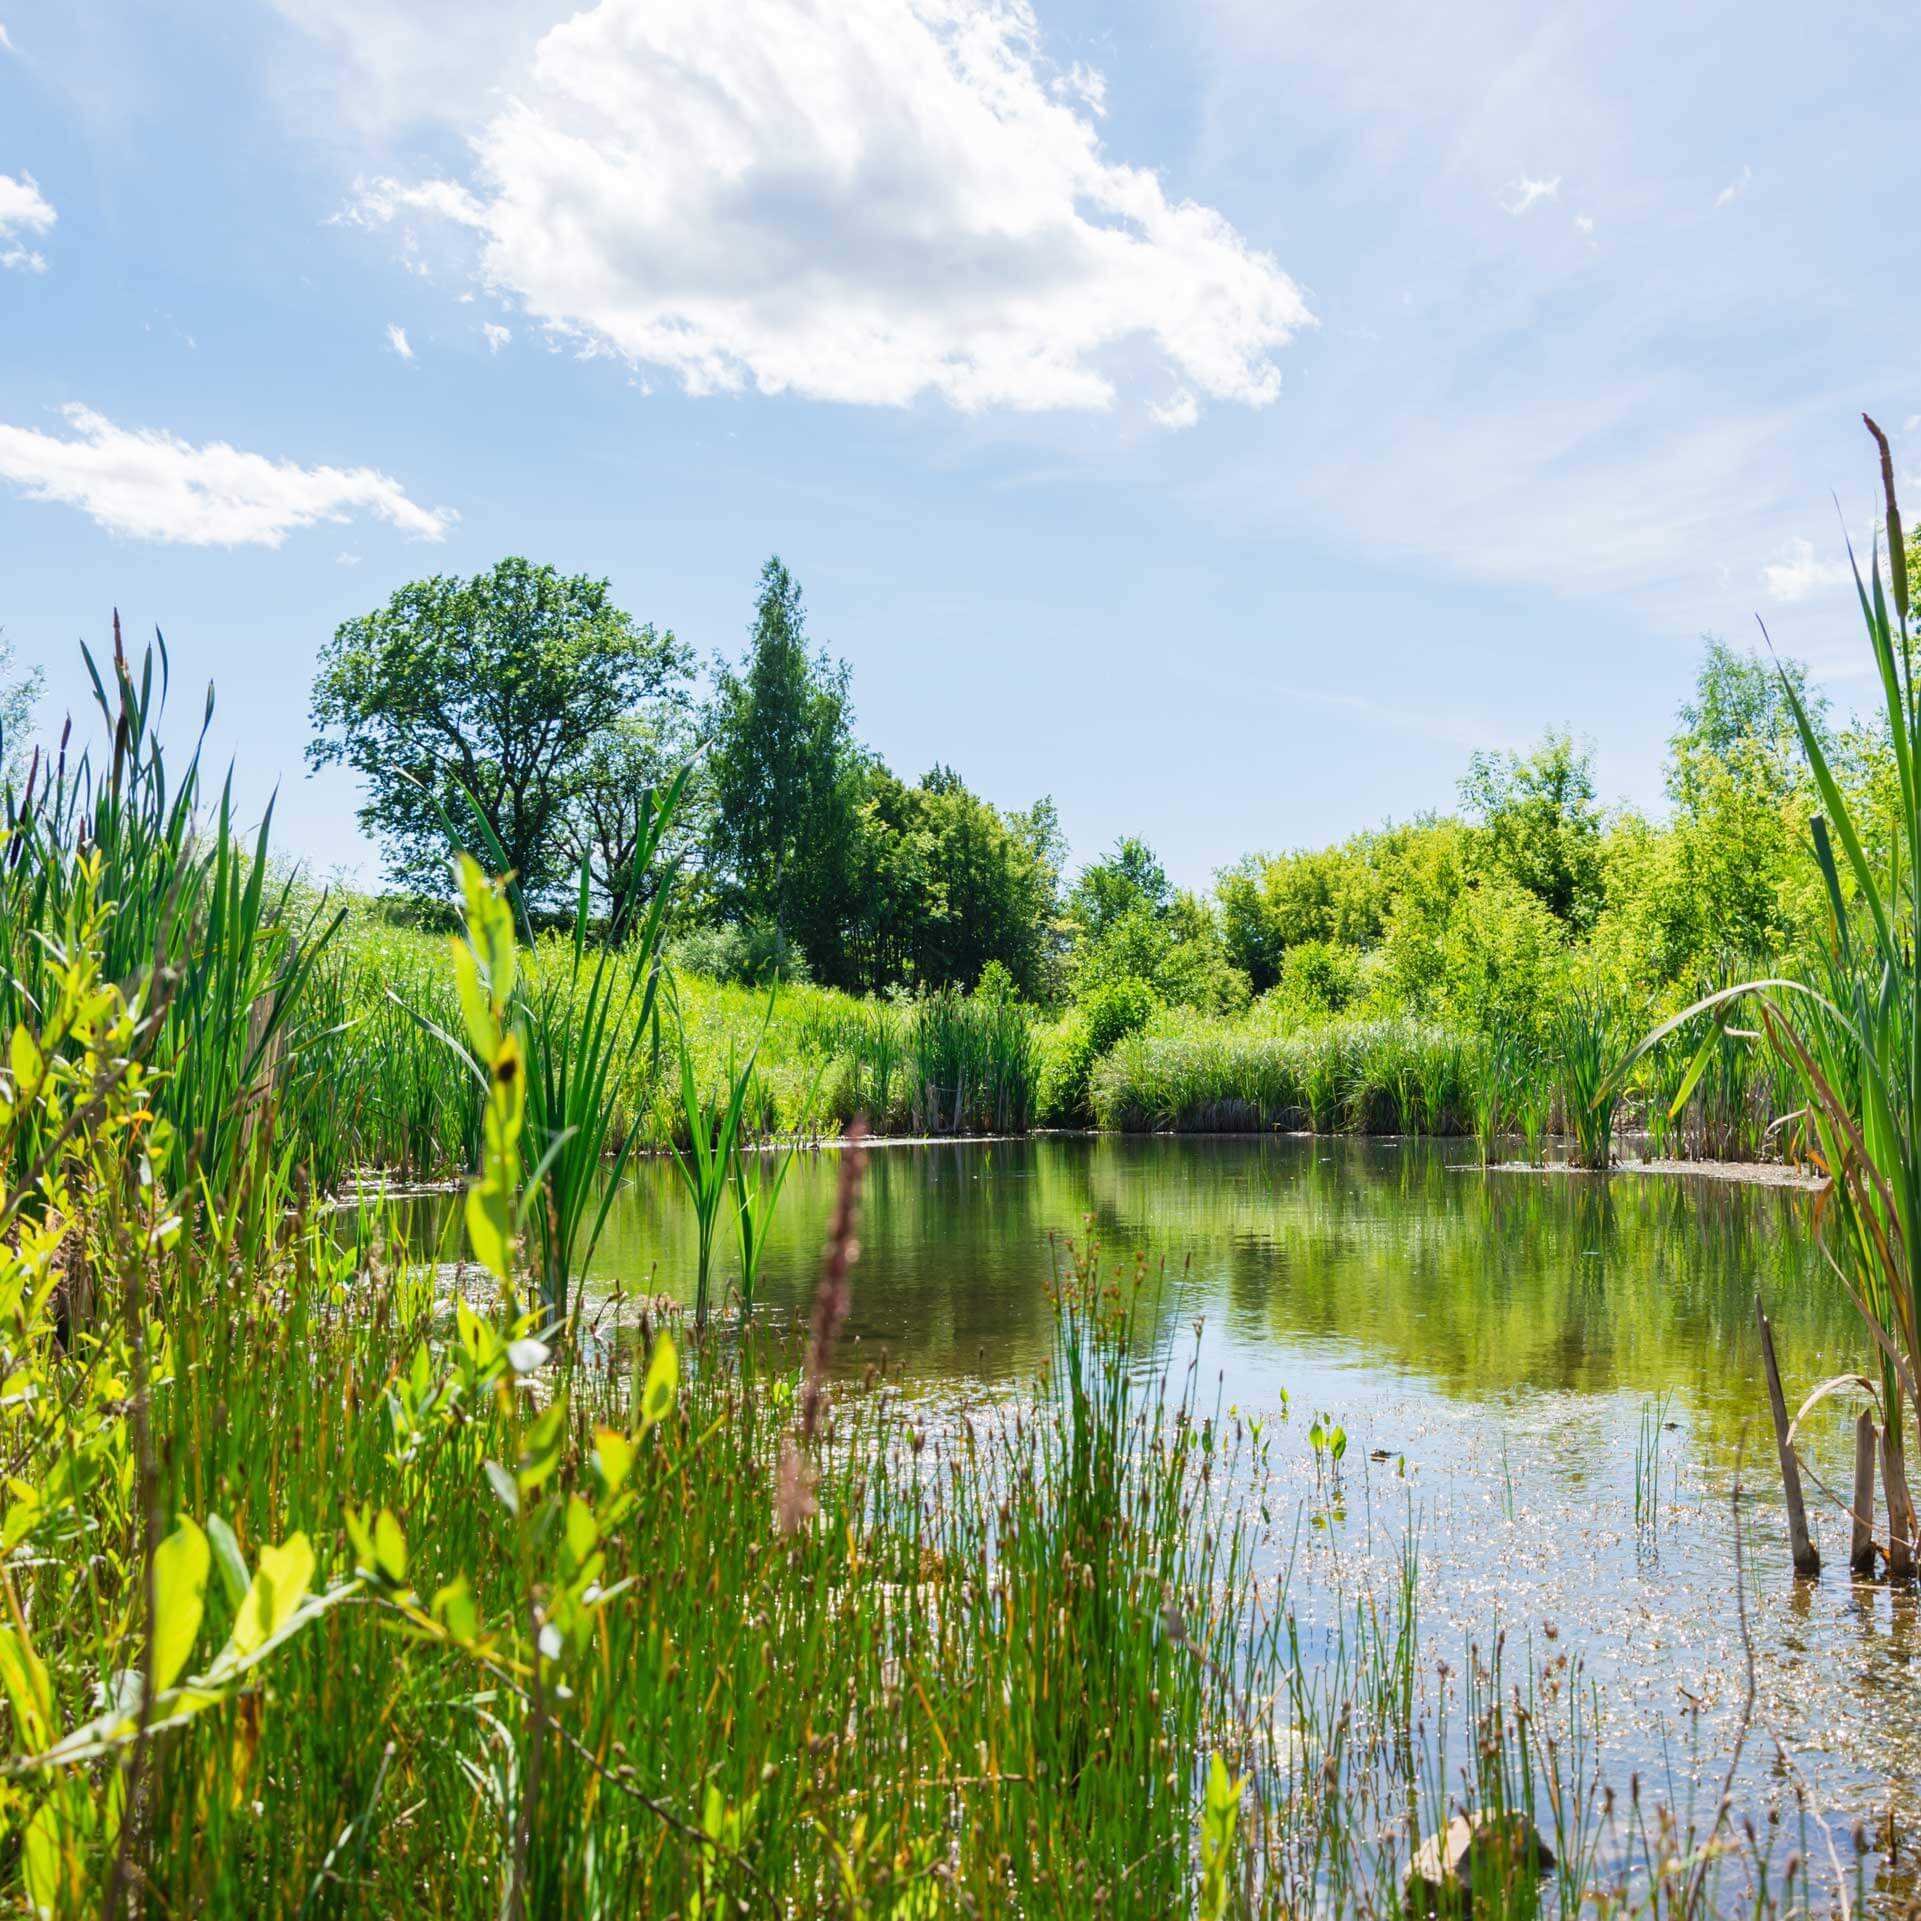 An image of a calm pond under a blue sky, with reeds and trees. A visual metaphor for the topic of this post Biodiversity Net Gain (BNG).